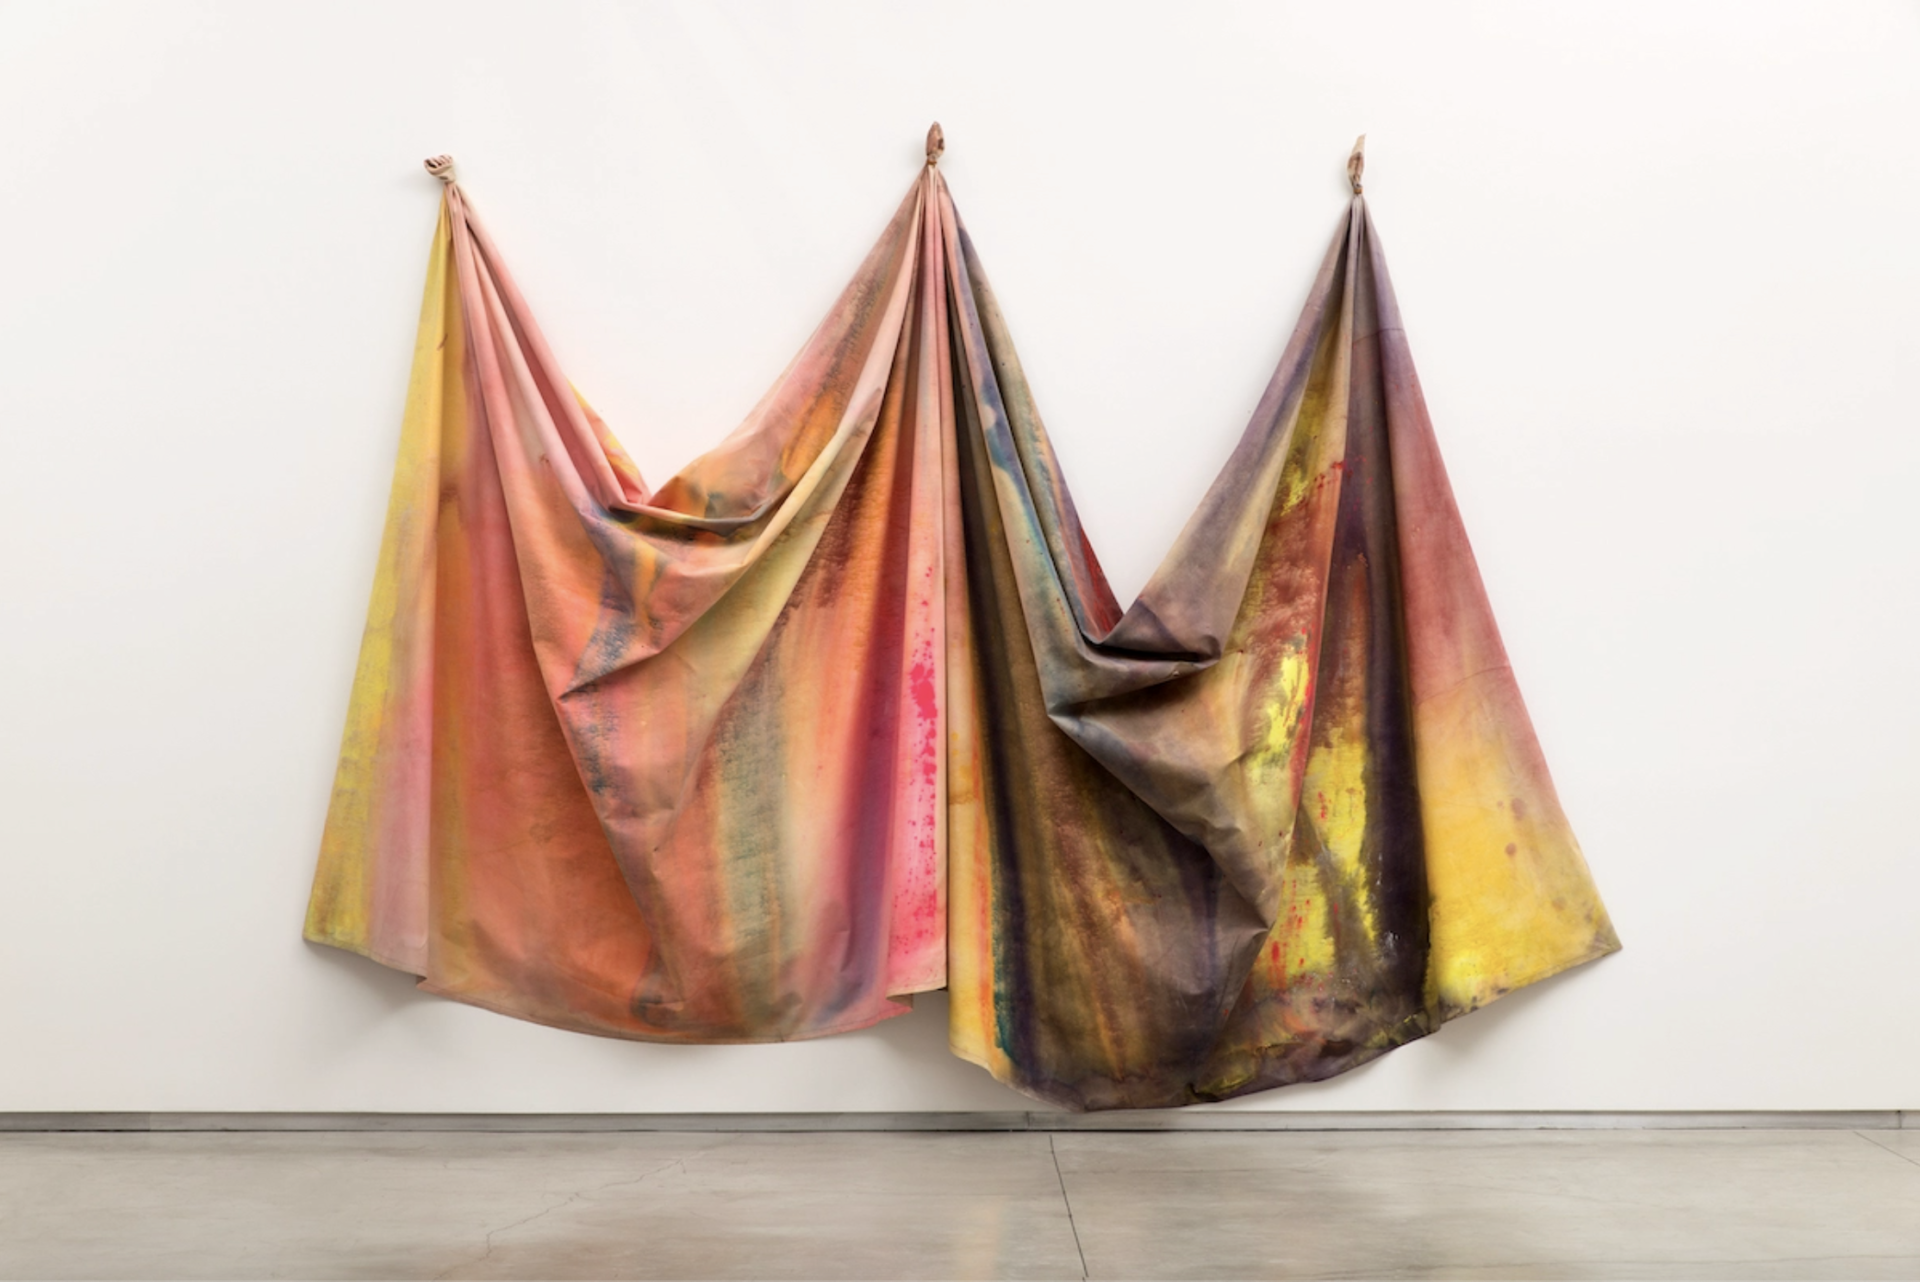 Mr. Gilliam’s “10/27/69,” at the Museum of Modern Art. Credit: Sam Gilliam/Artists Rights Society (ARS), New York; Collection of The Museum of Modern Art, New York, NY. Photograph by Fredrik Nilsen Studio